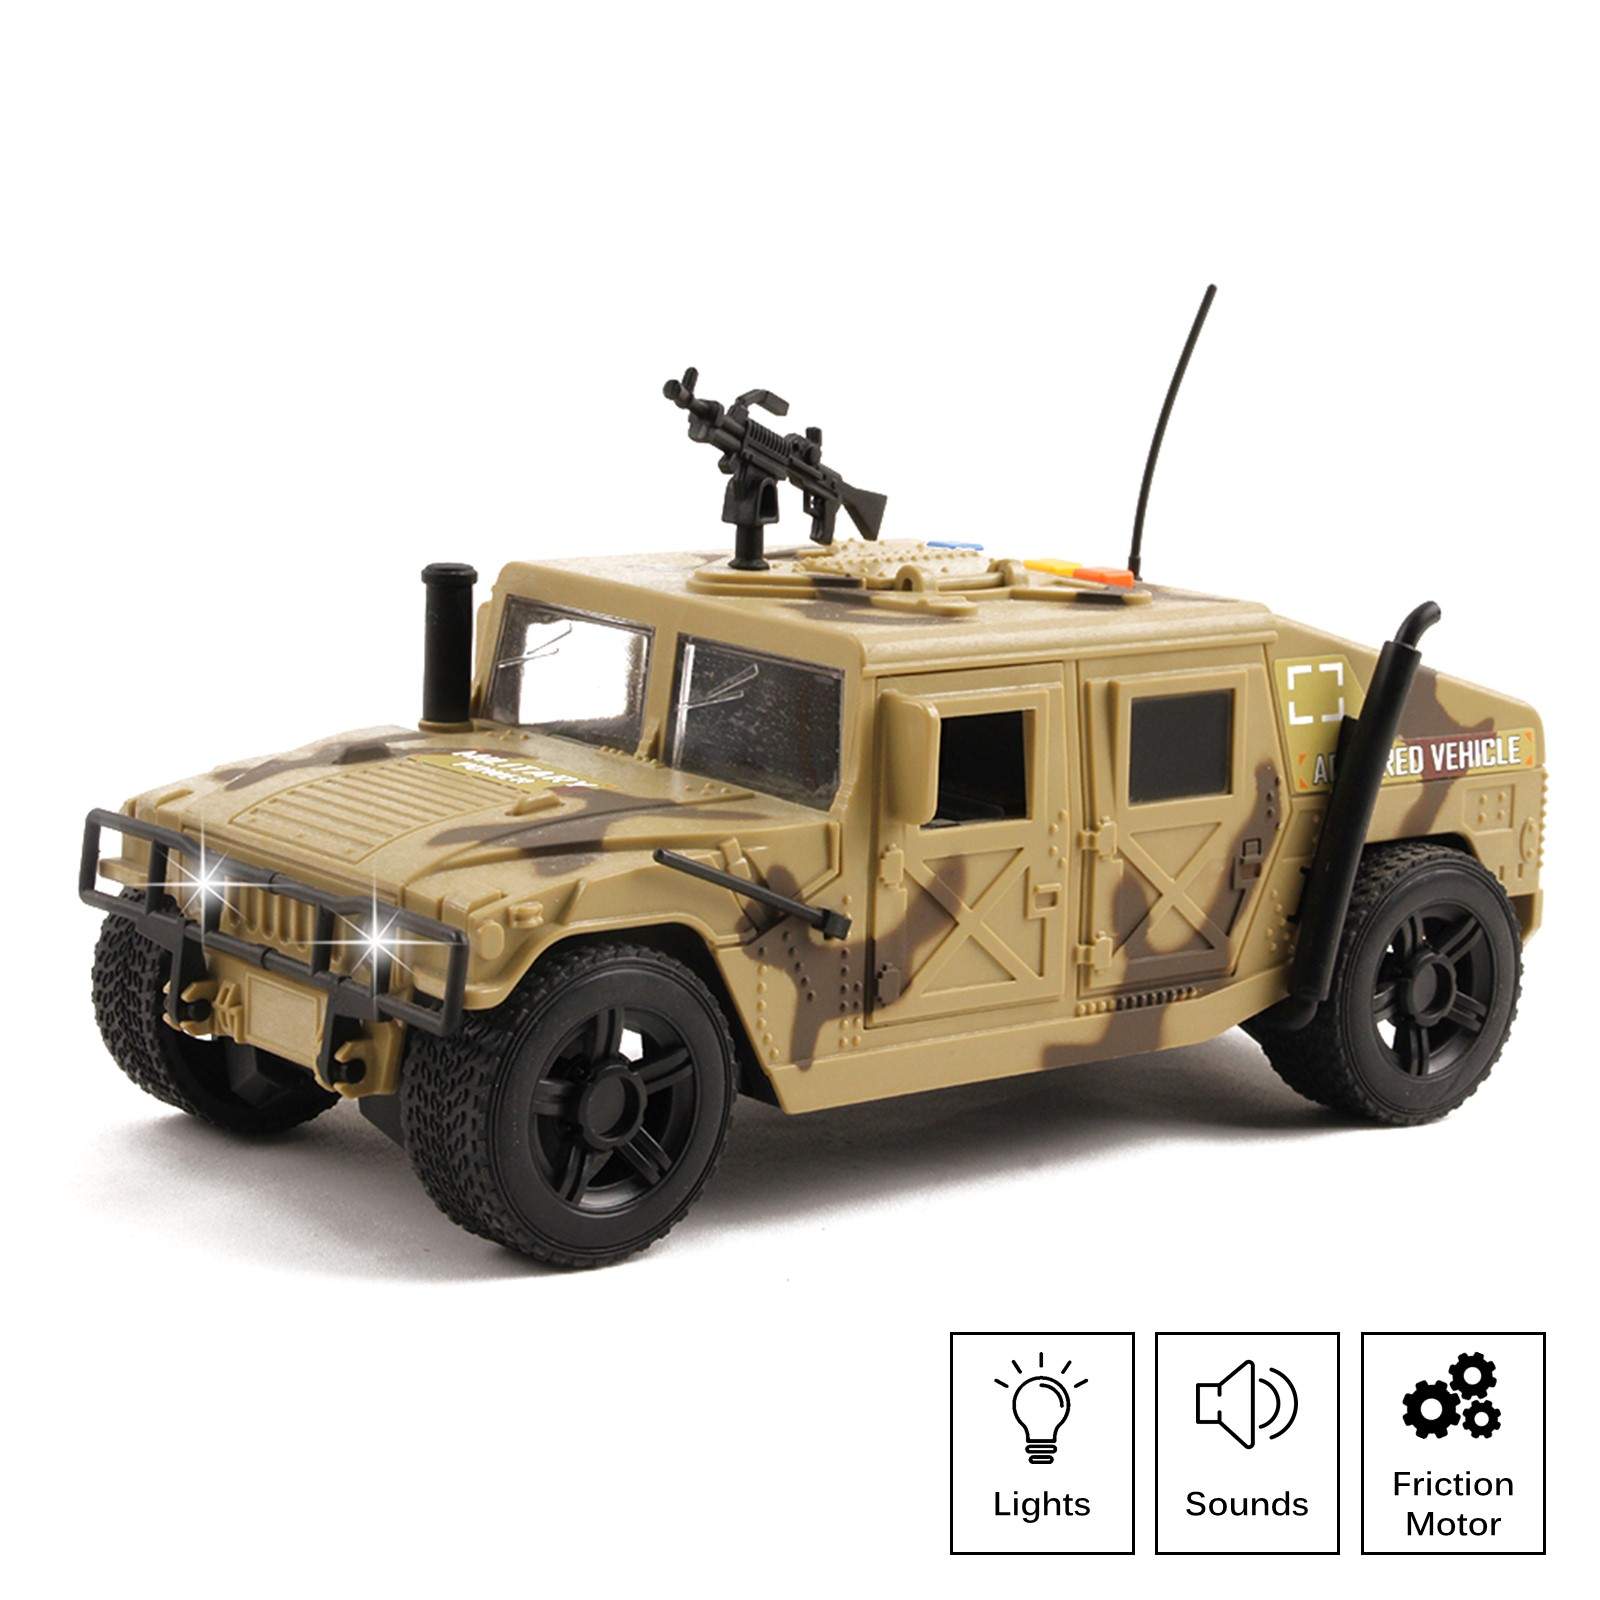 Military Fighter Truck Friction Powered With Lights And Sounds Kids Push And Go 1:16 Scale Pretend Play Armored Army Vehicle Doors Open Quality Action Toy Car Great Gift For Children Boys Girls